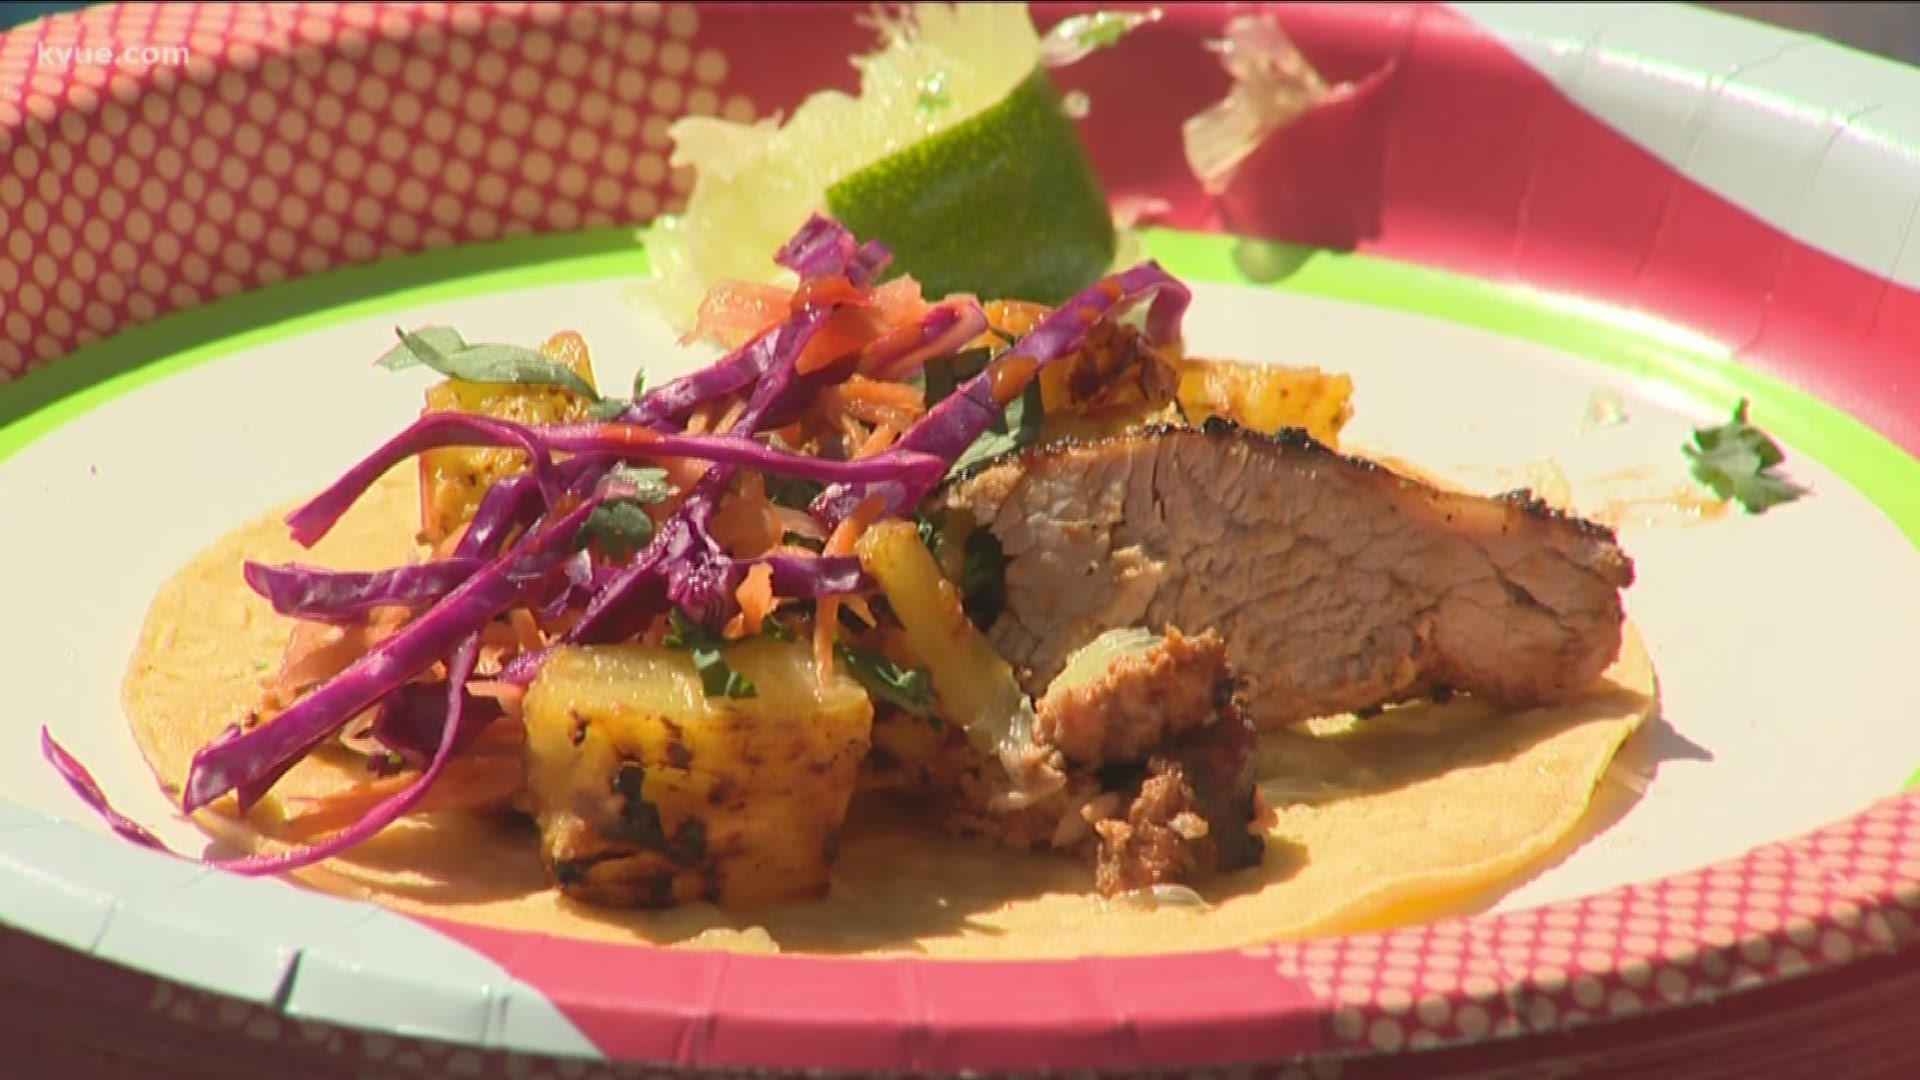 Chef Tim Muench from Brama in North Austin has a great recipe for tacos al pastor that'll make every tailgate a lot more flavorful.